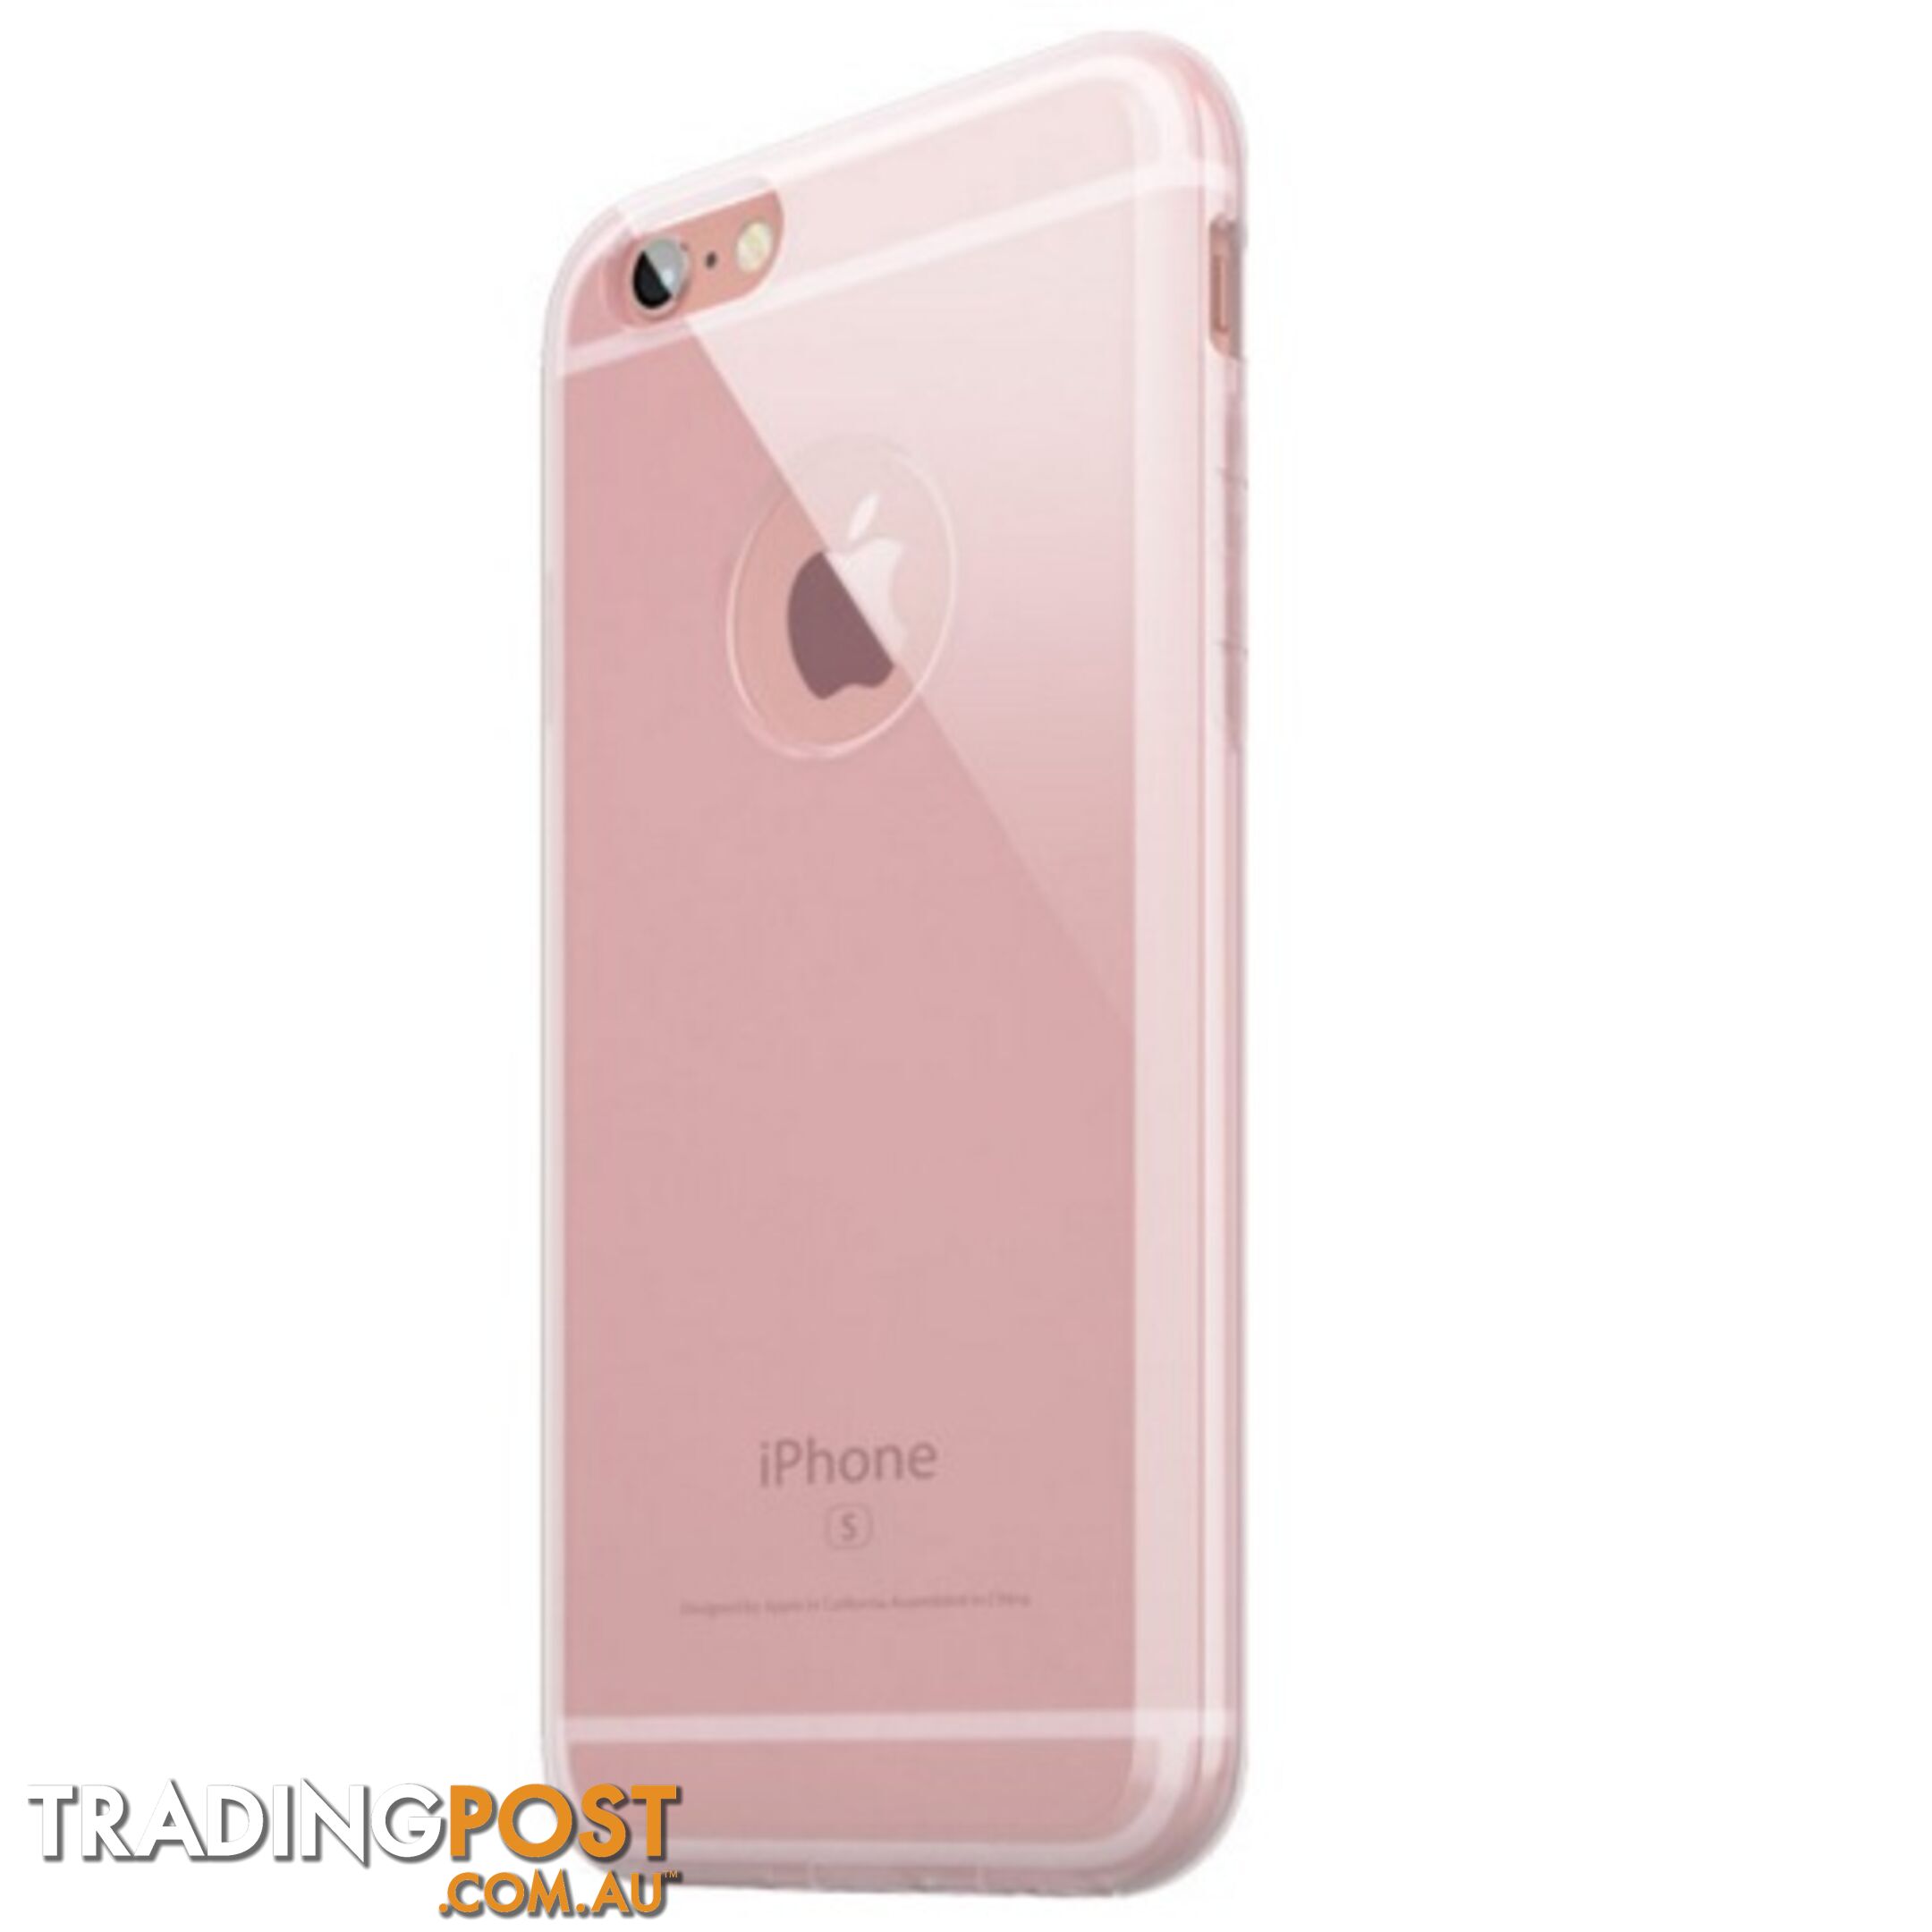 Patchworks Colorant C0 Soft Clear Case for iPhone 6 Plus / 6s Plus - Pink - 8809453311716/7537 - Patchworks